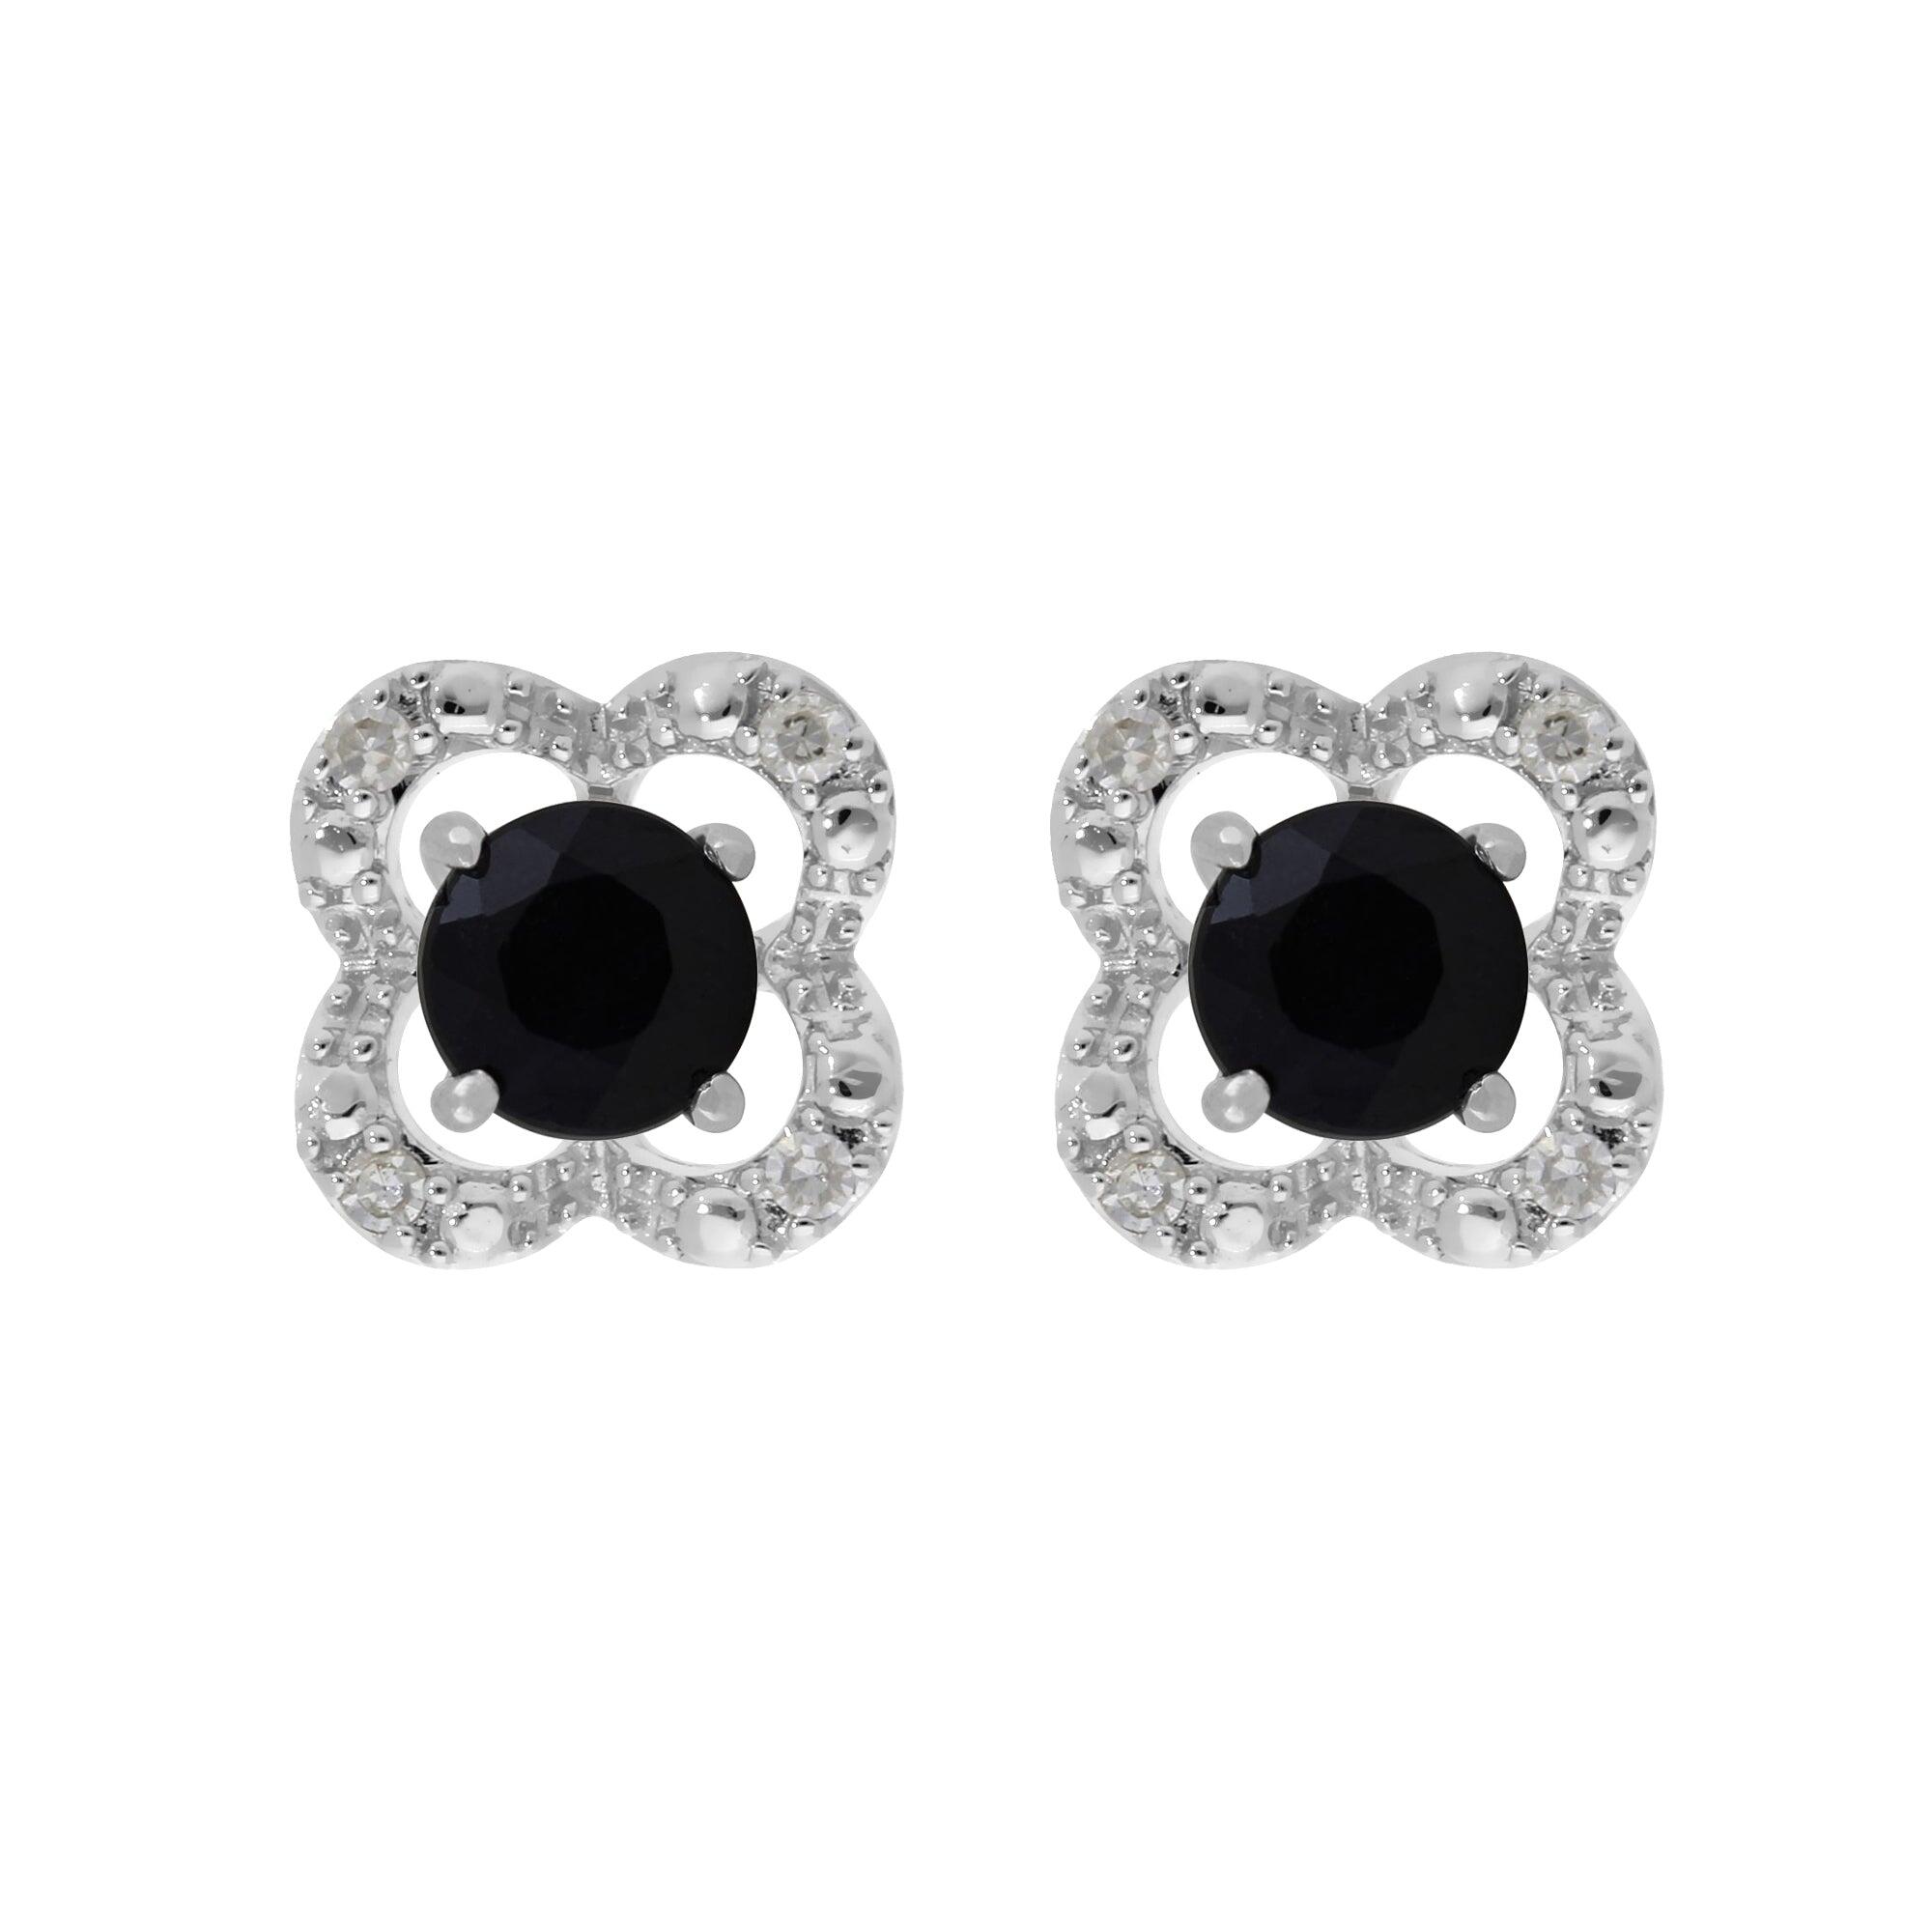 Classic Round Dark Blue Sapphire Studs with Detachable Diamond Flower Ear Jacket in 9ct White Gold